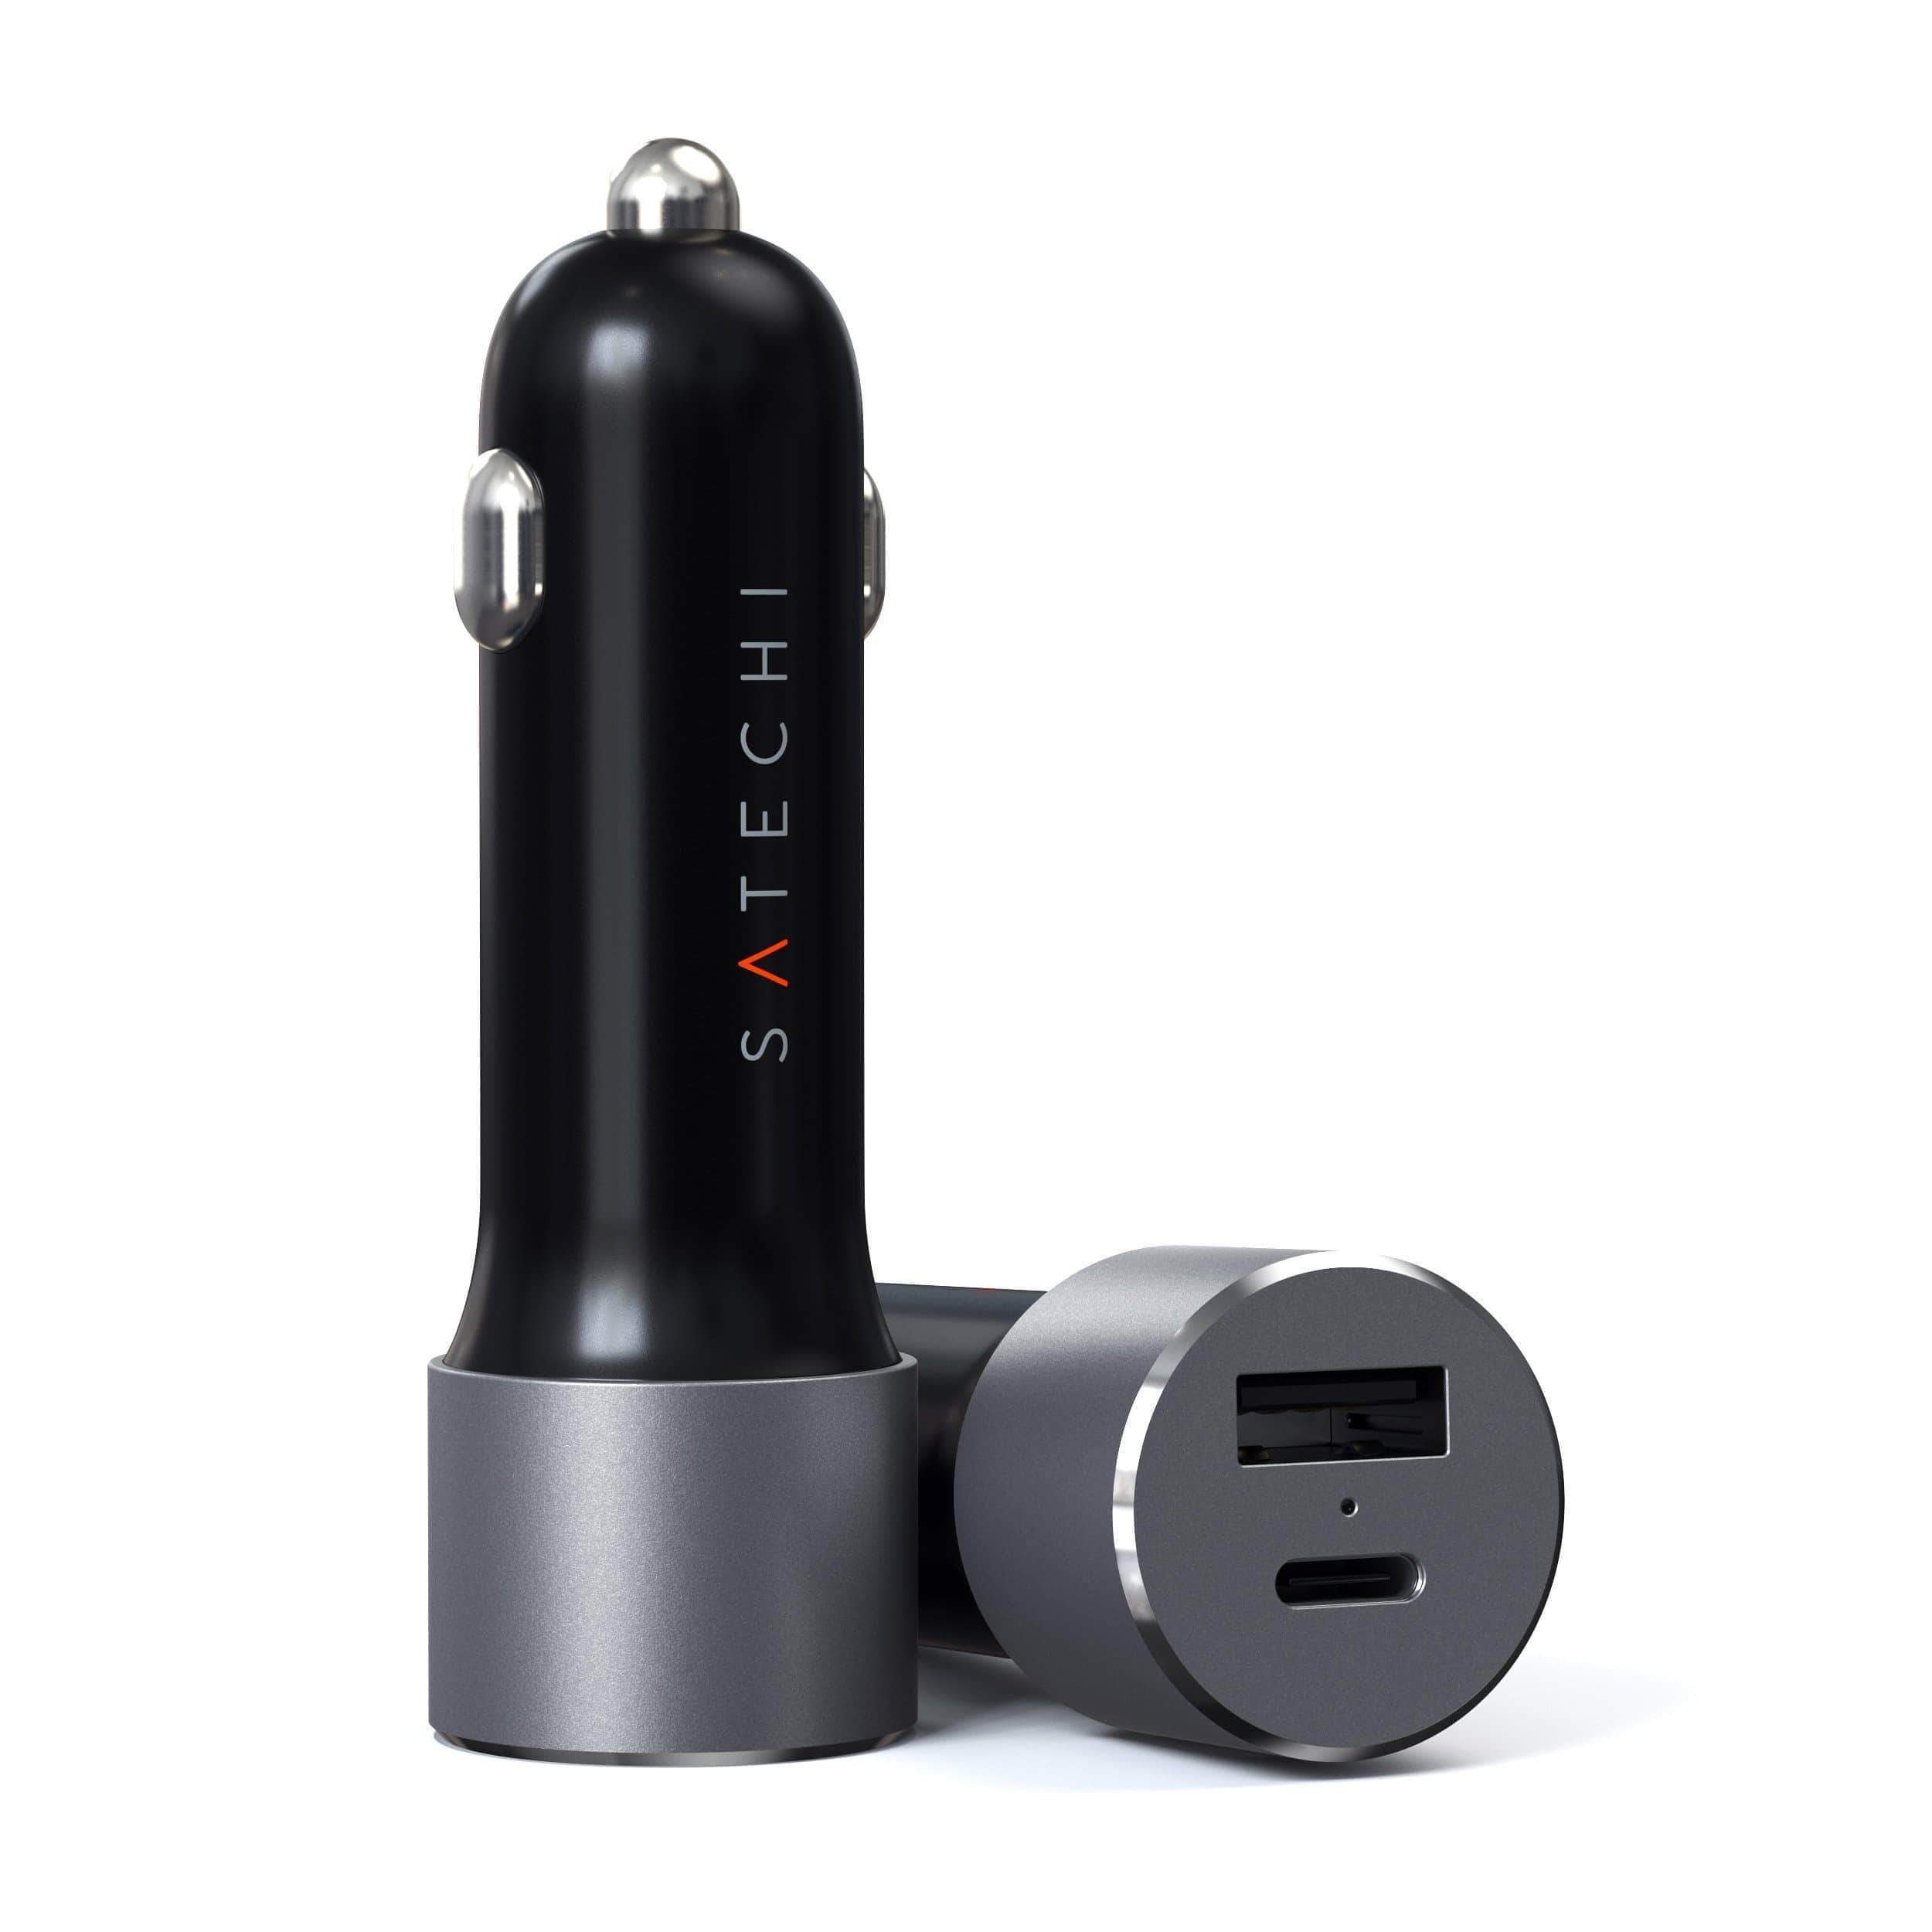 Satechi Chargeur Voiture 72W USB-C Power Delivery + USB Voyant LED Gris  Sidéral - Chargeur allume-cigare - LDLC